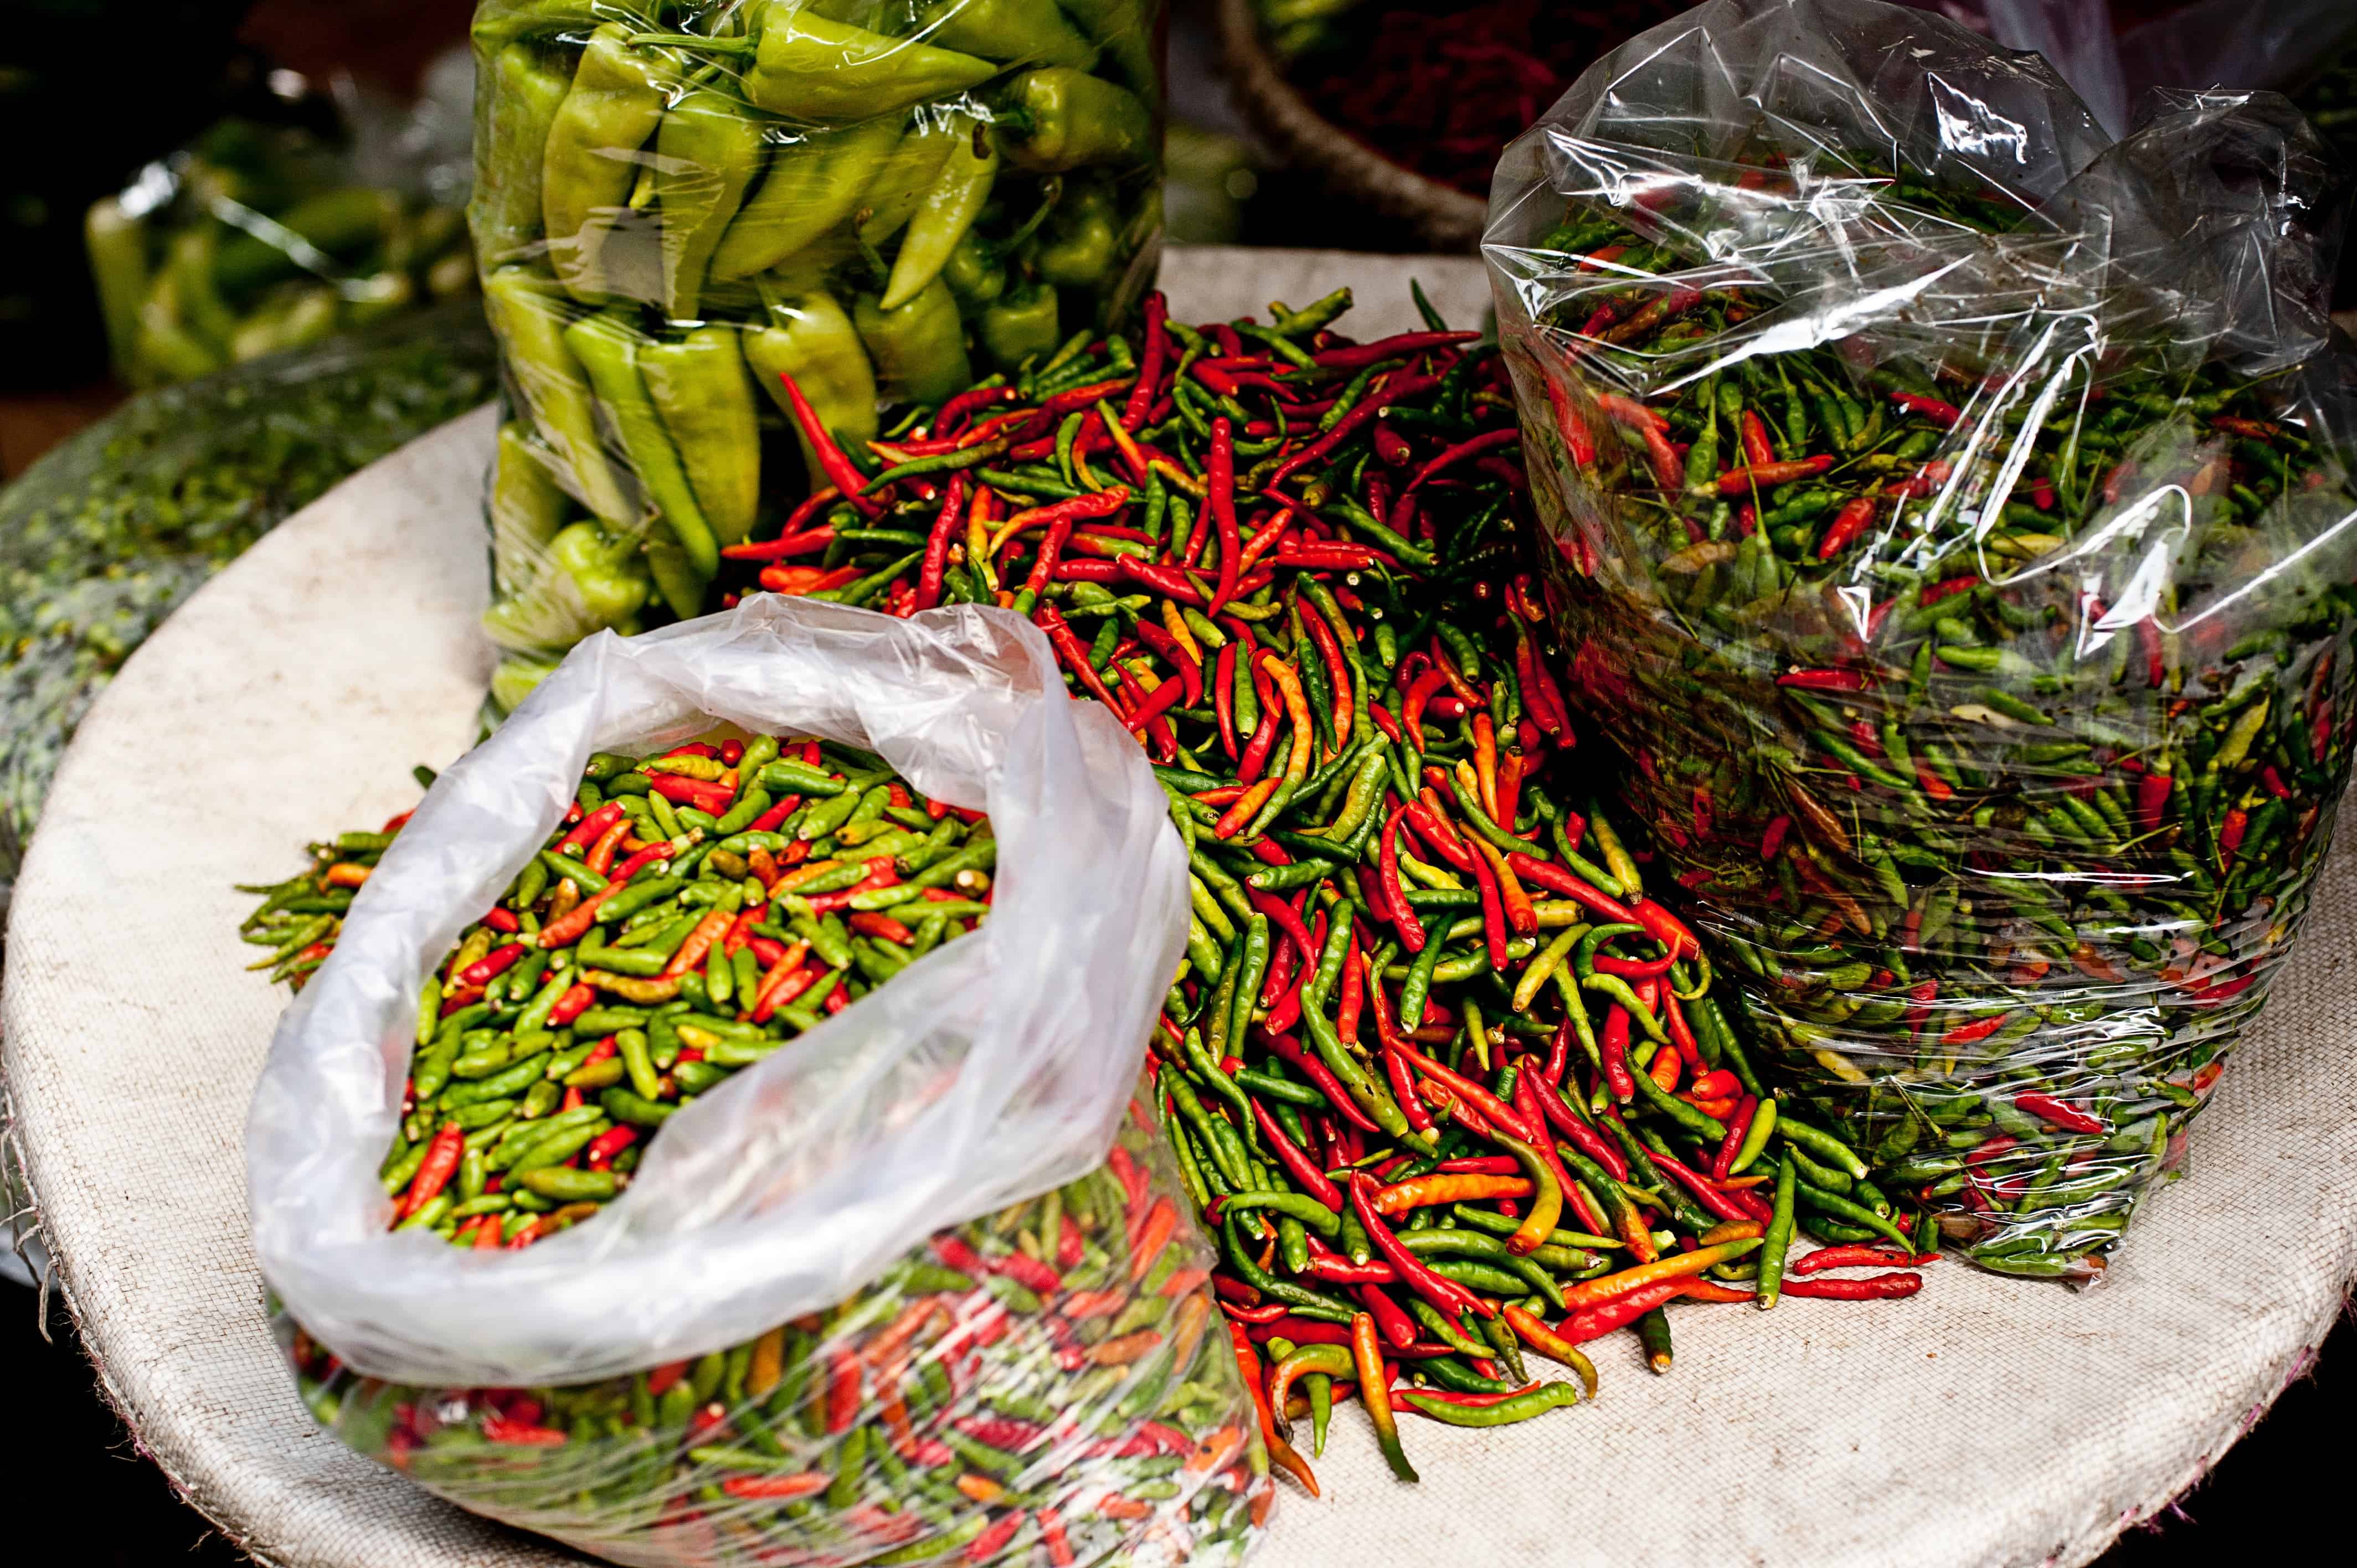 Peppers might be very good for you. Image credits: Paul Morris.